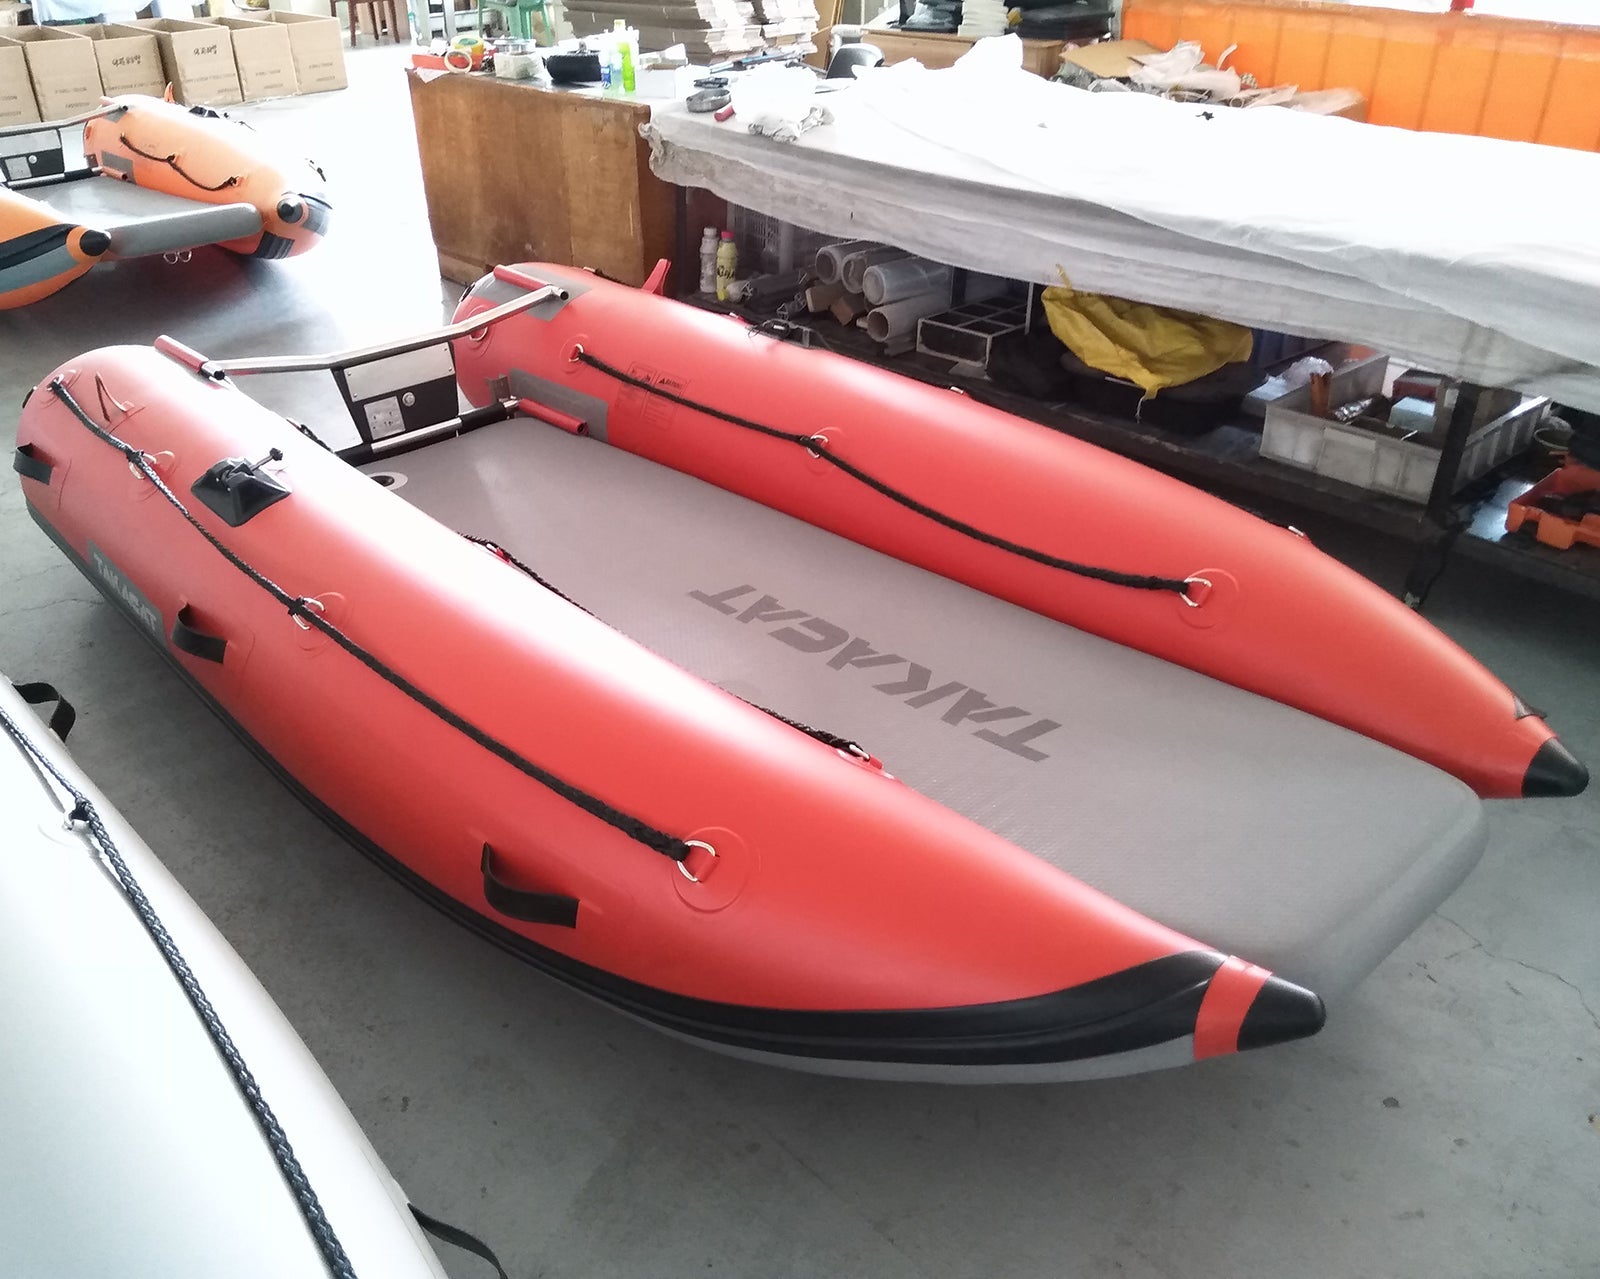 Takacat 420 LX Portable Inflatable Boat